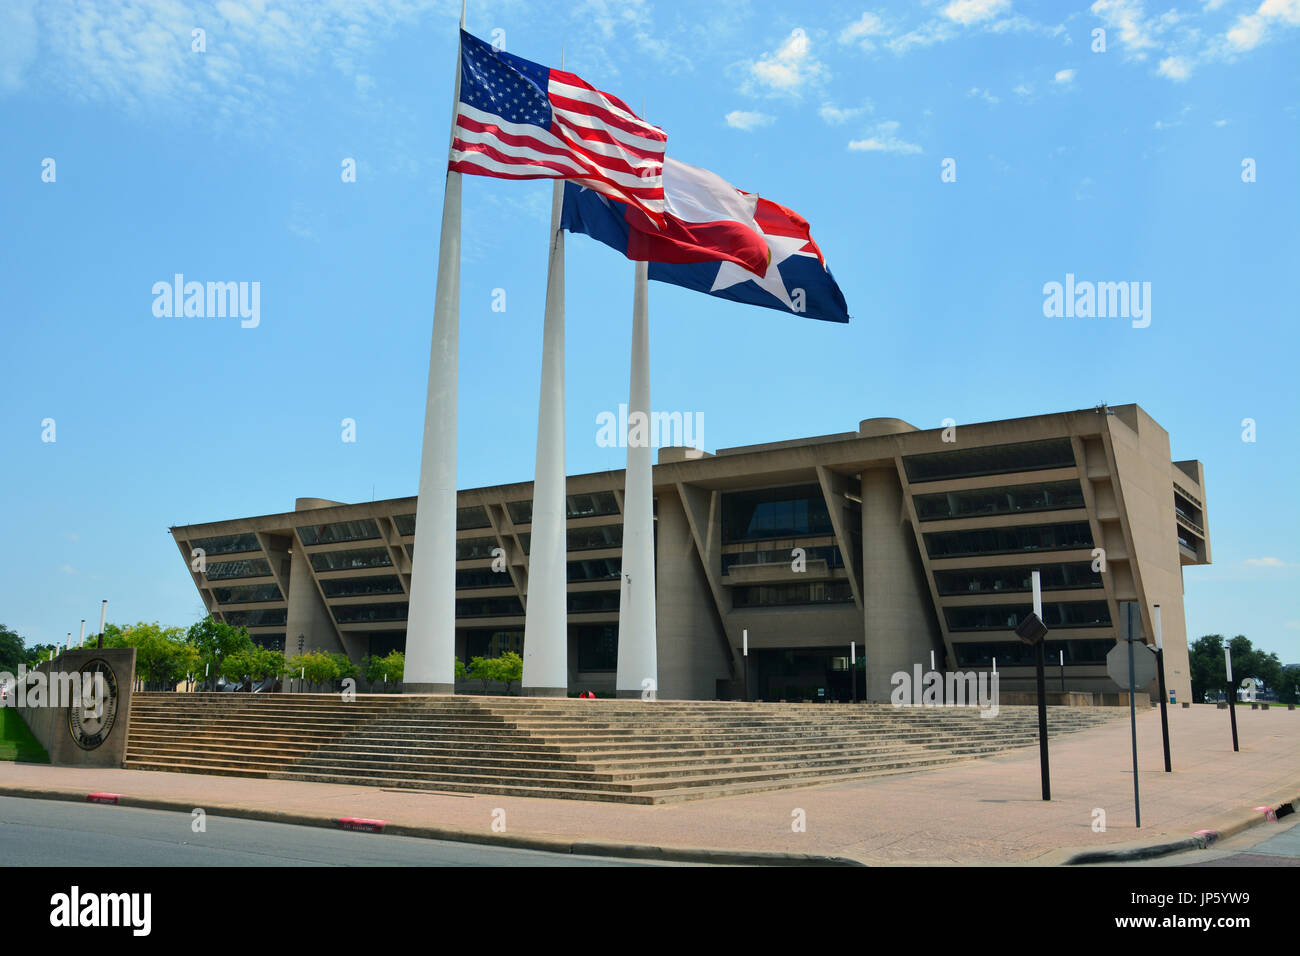 The American, Texas and City of Dallas flags blow in the wind outside of the Dallas City Hall designed by I.M. Pei. Stock Photo